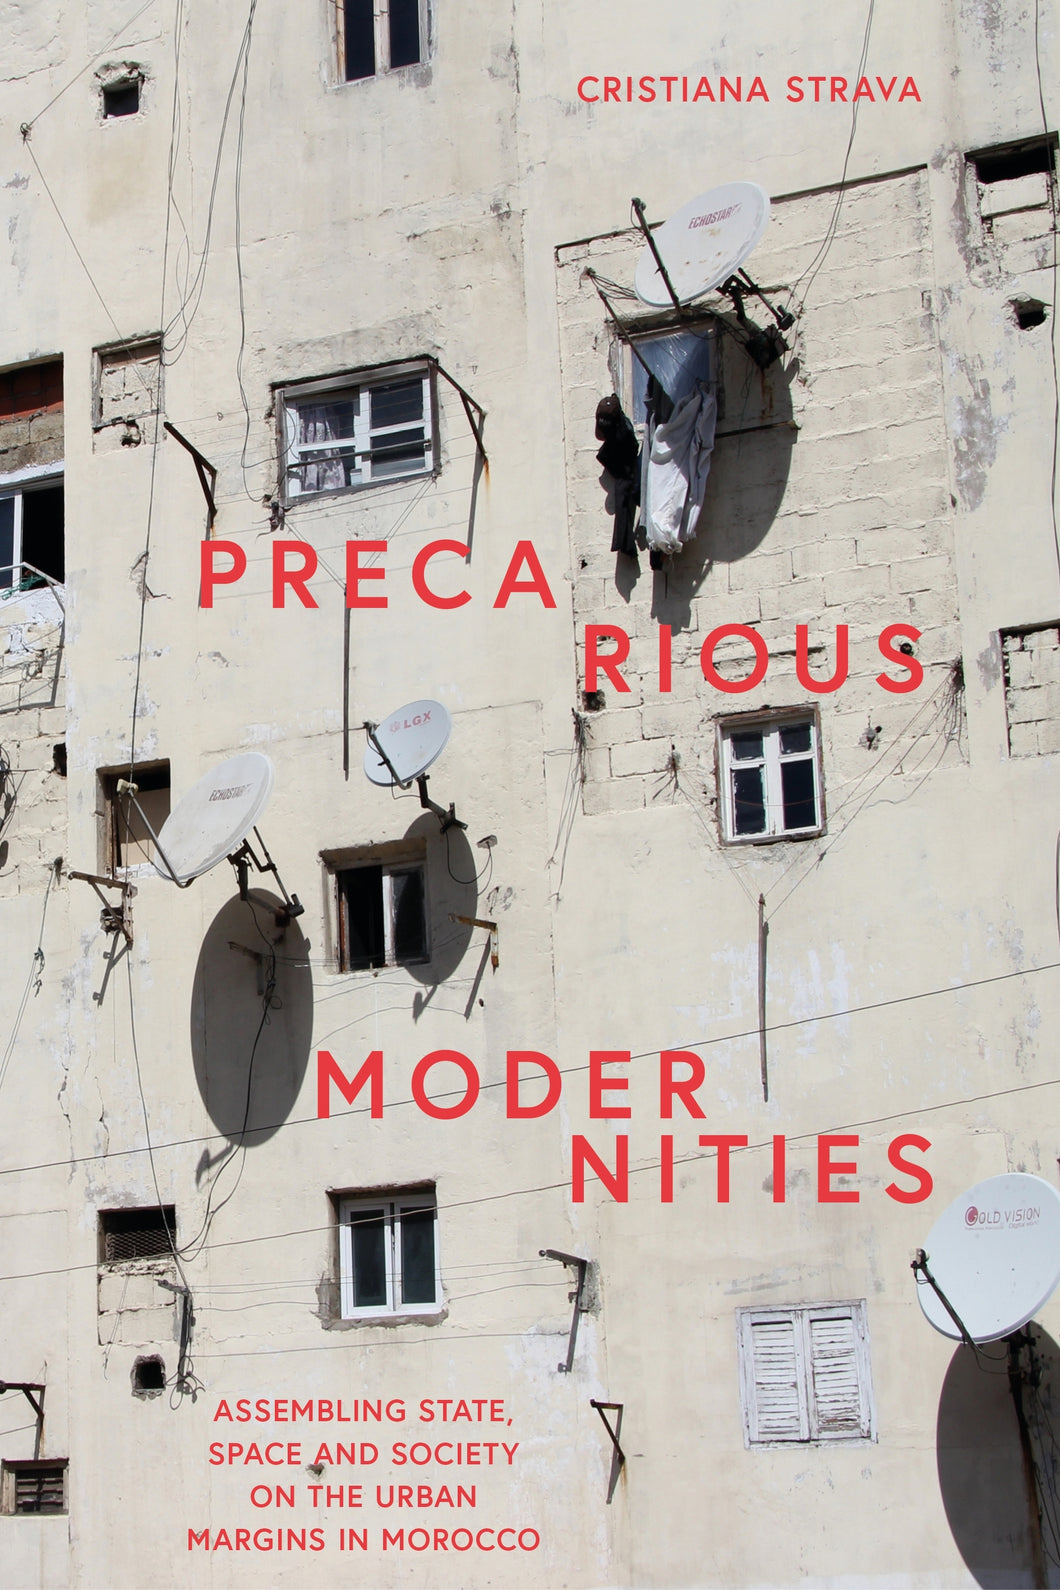 Precarious Modernities: Assembling State, Space and Society on the Urban Margins in Morocco